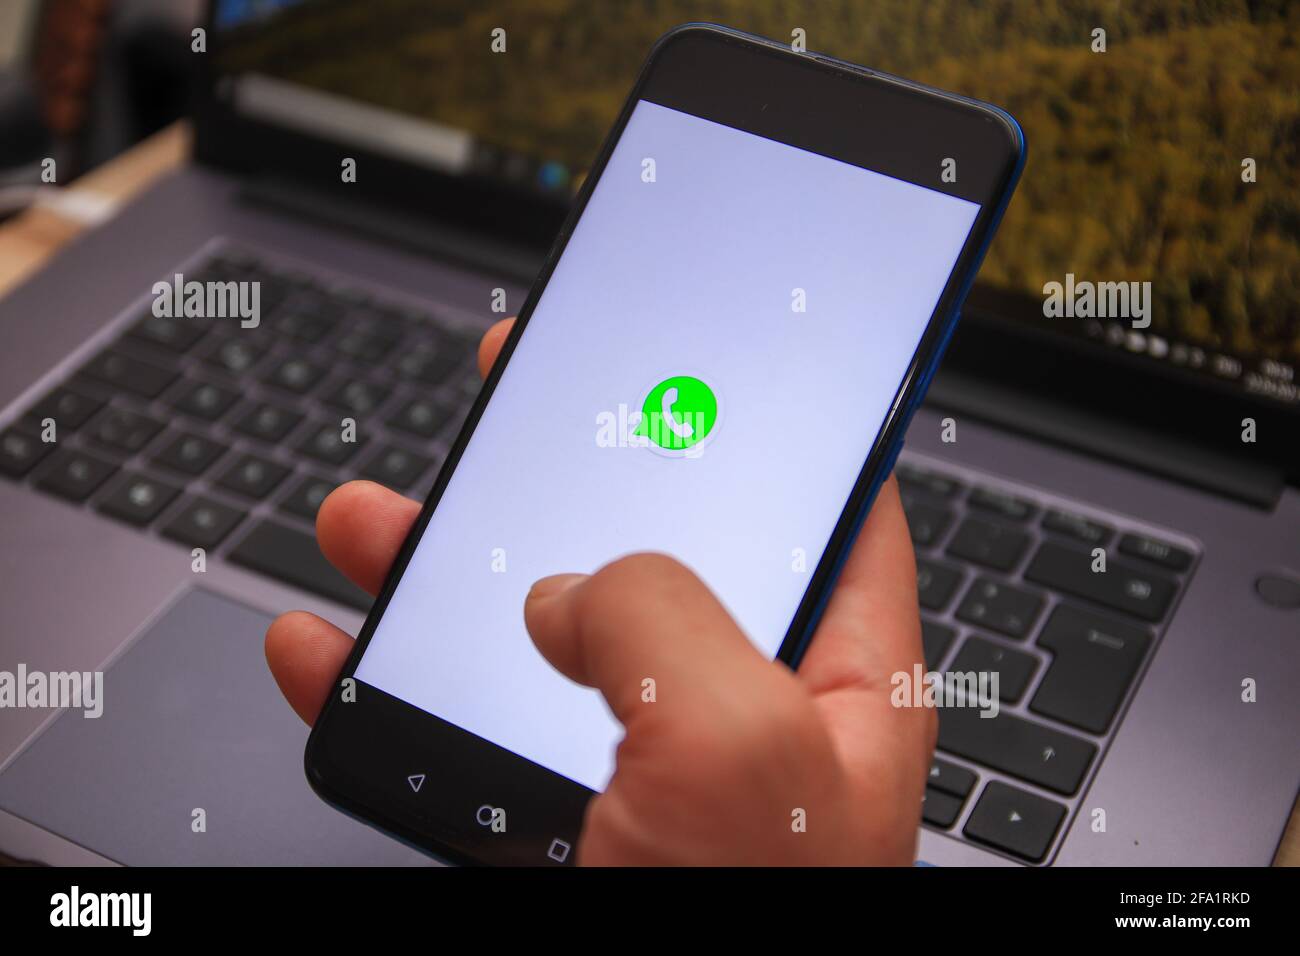 Berlin, Germany - April 22, 2021: WhatsApp logo displayed on smartphone. With WhatsApp, you'll get fast, simple, secure messaging and calling for free Stock Photo